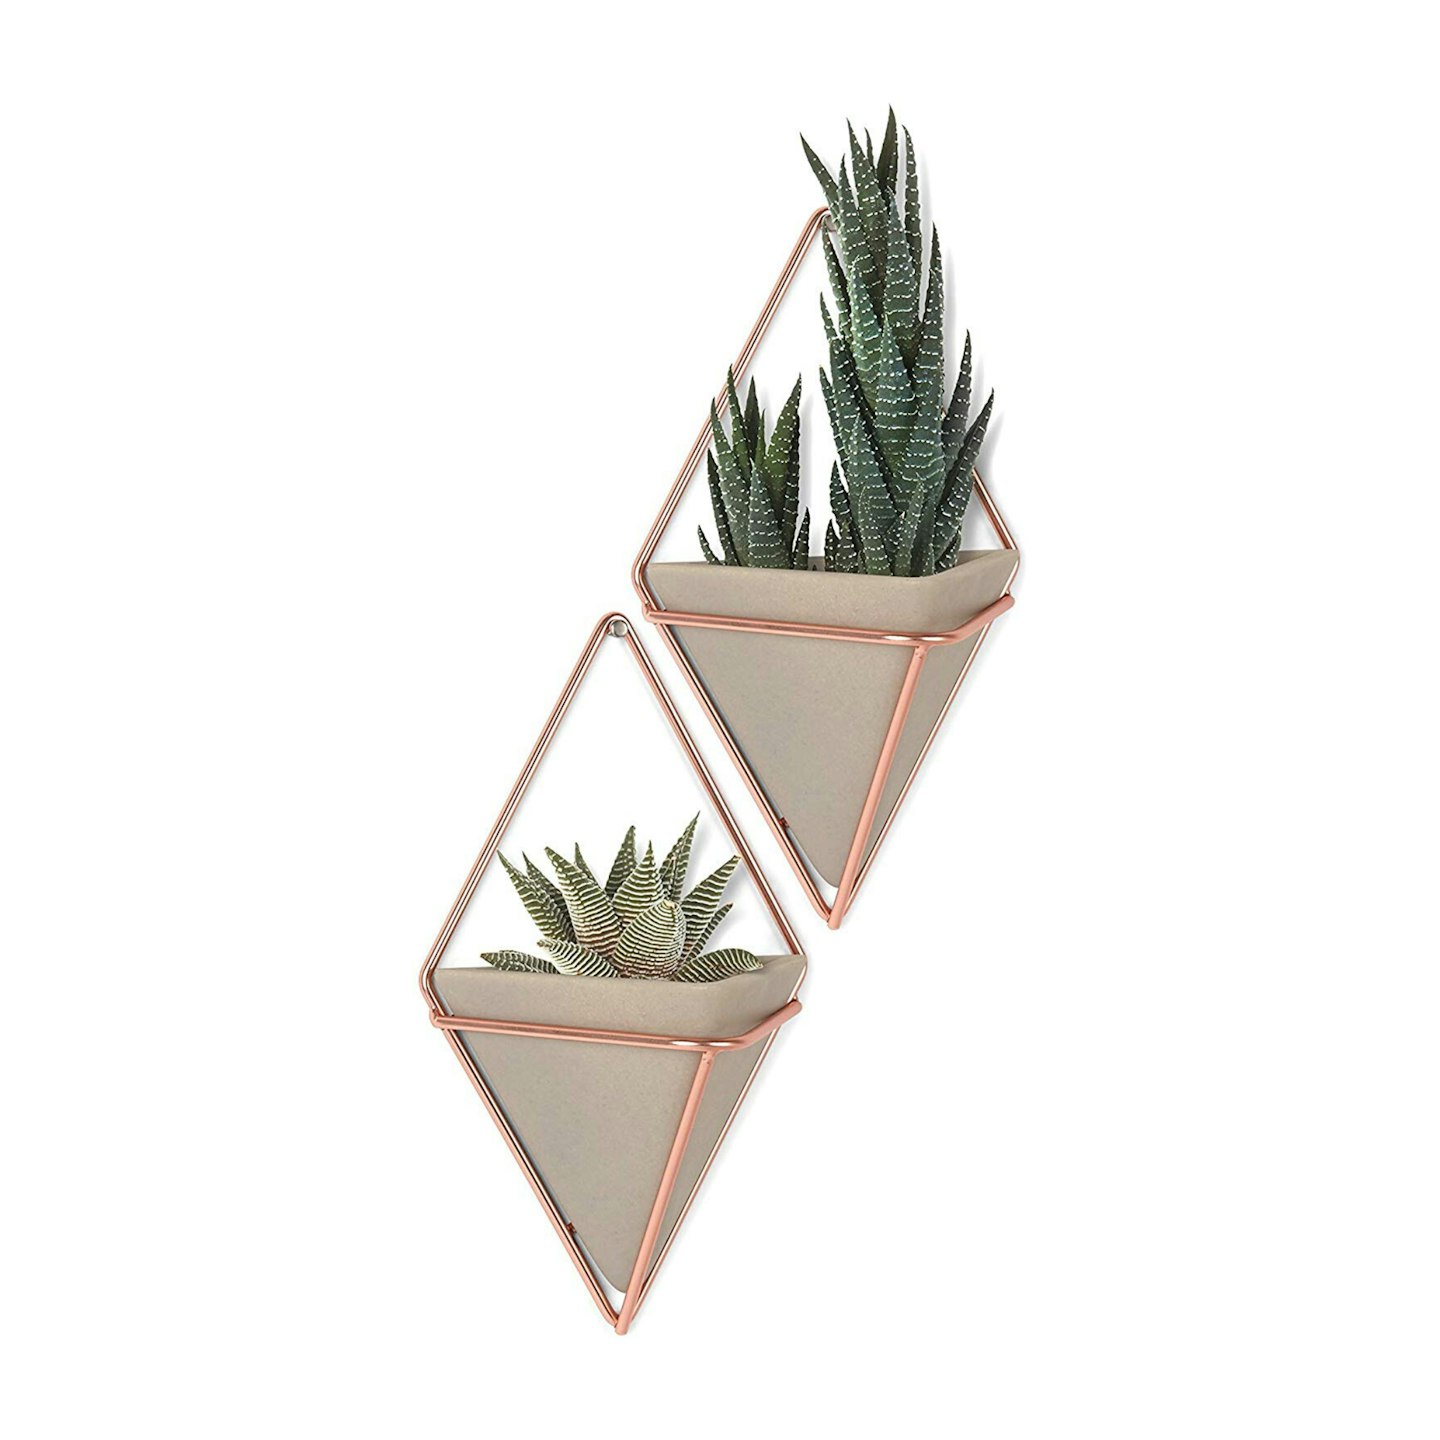 Hanging Planter Vase & Geometric Wall Decor Container